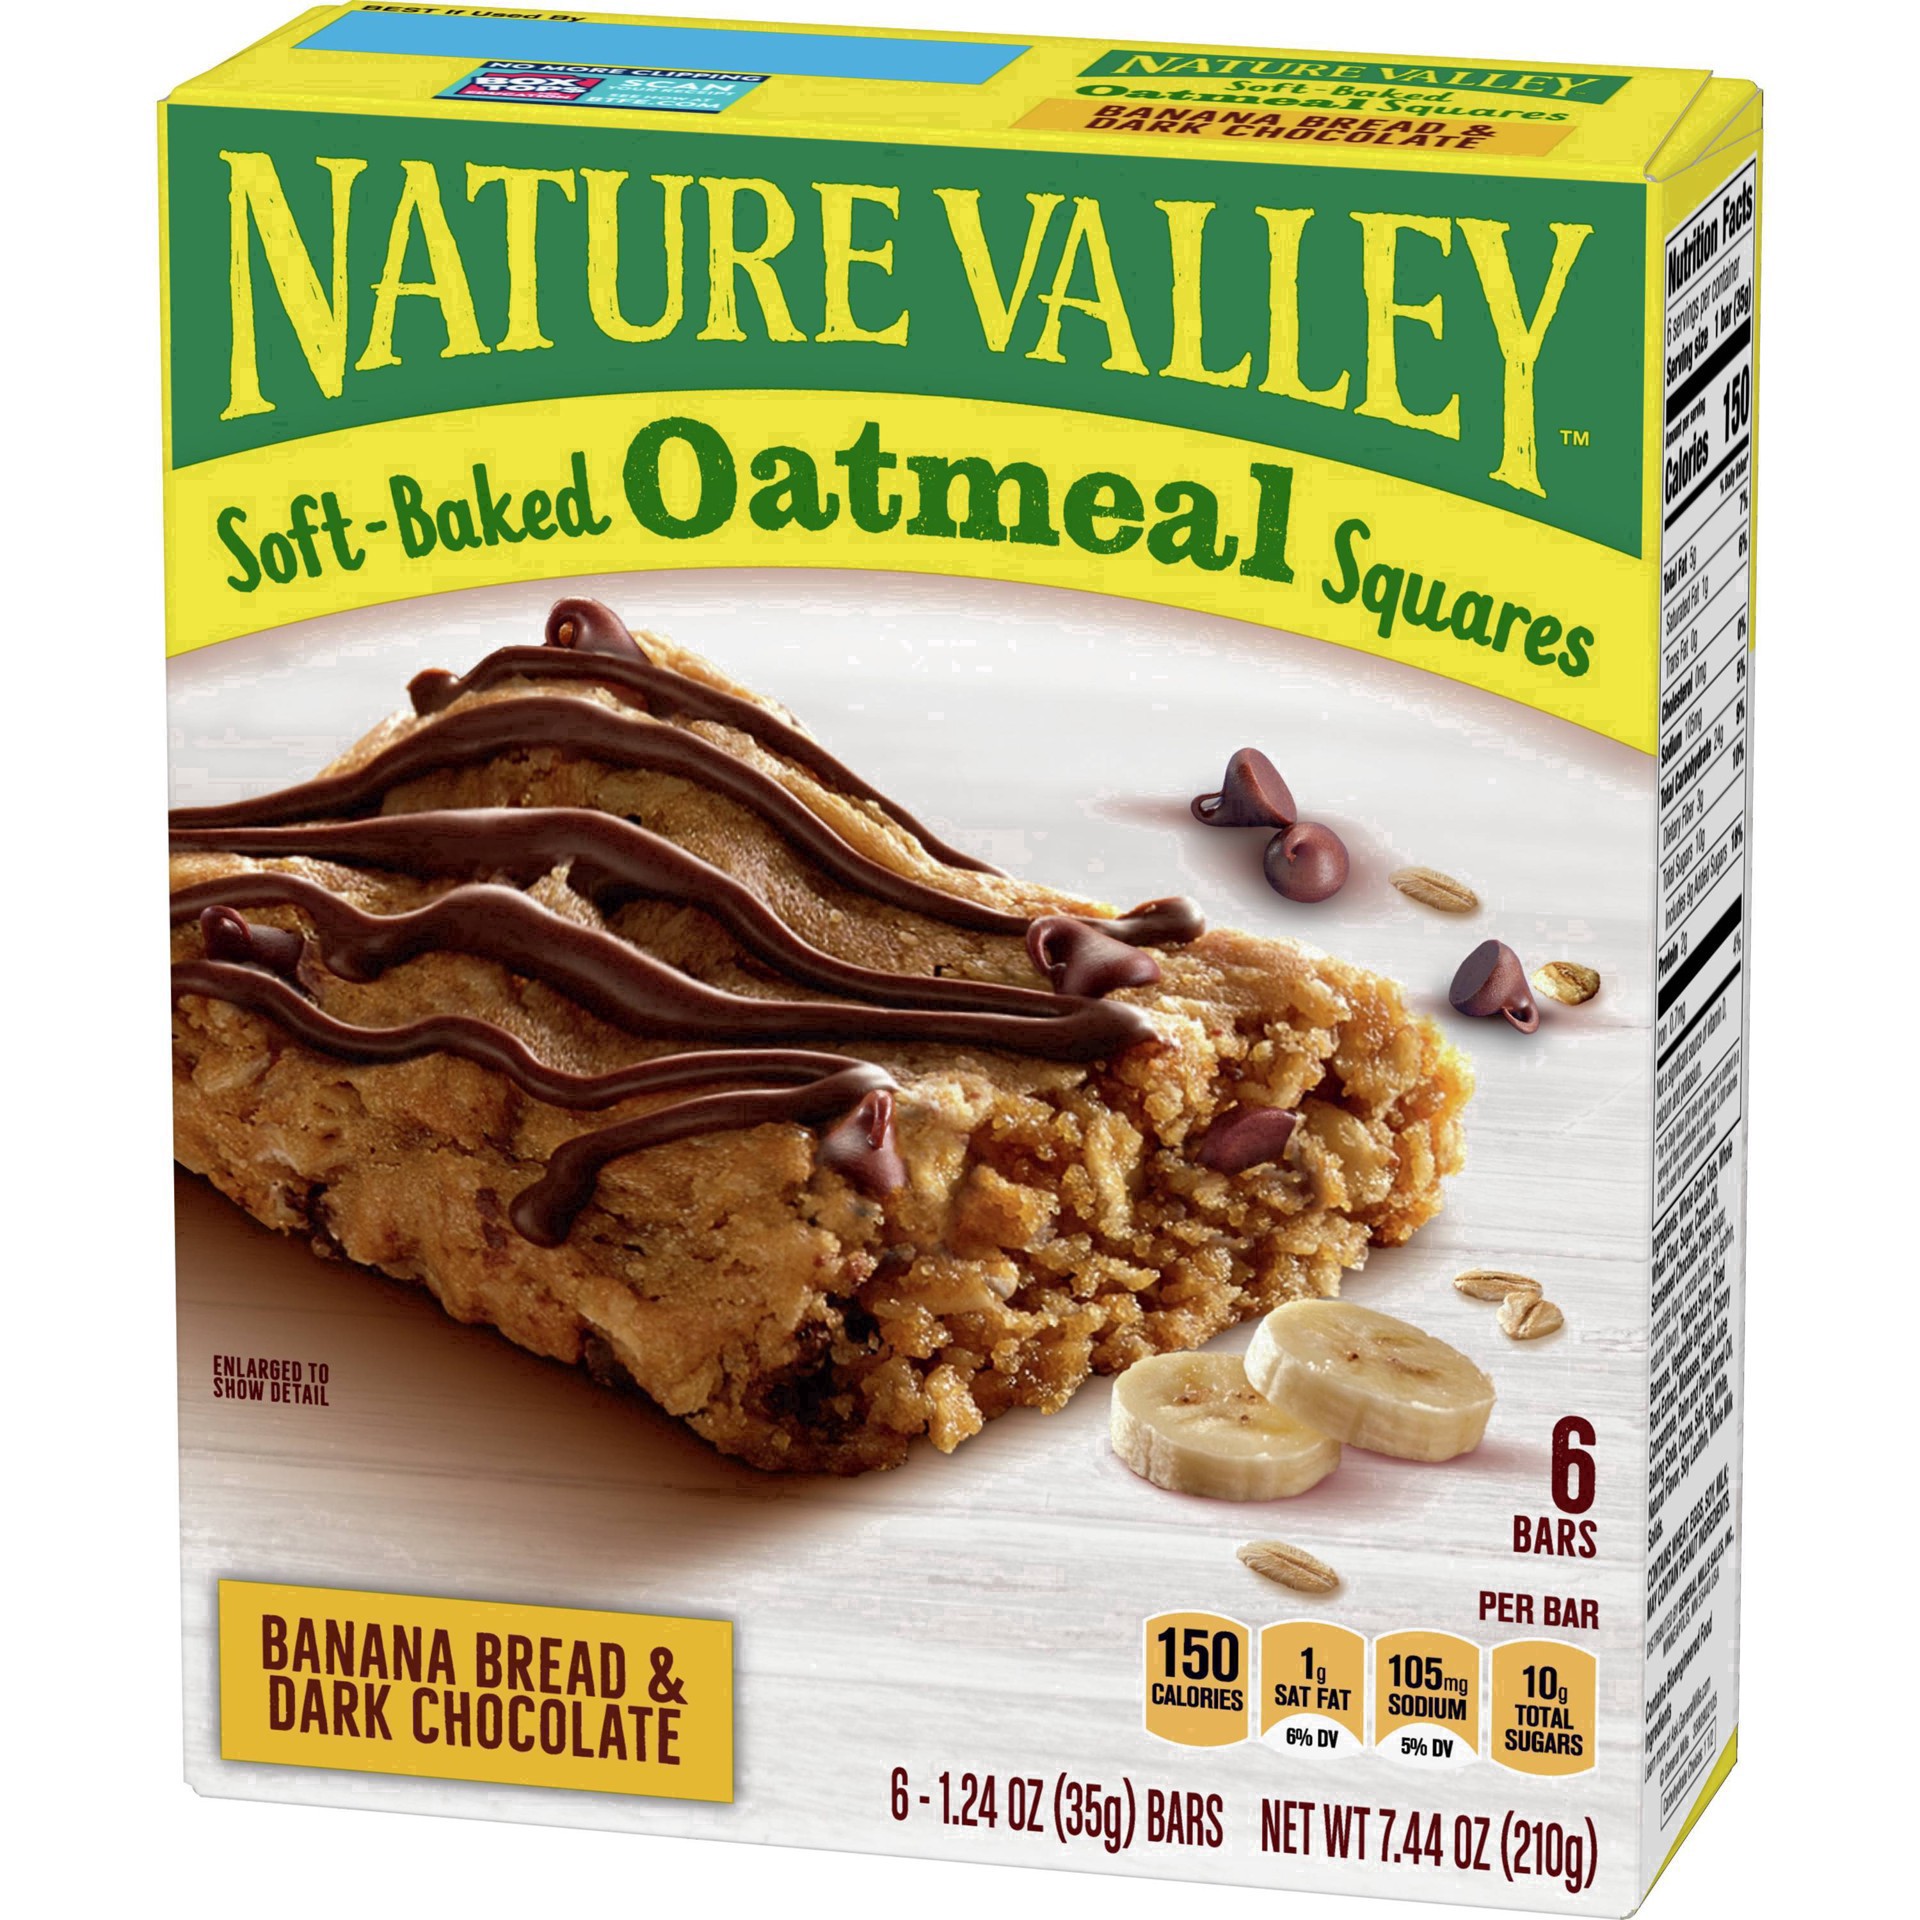 slide 41 of 101, Nature Valley Soft-Baked Oatmeal Squares, Banana Bread & Dark Chocolate, 6 ct, 6 ct